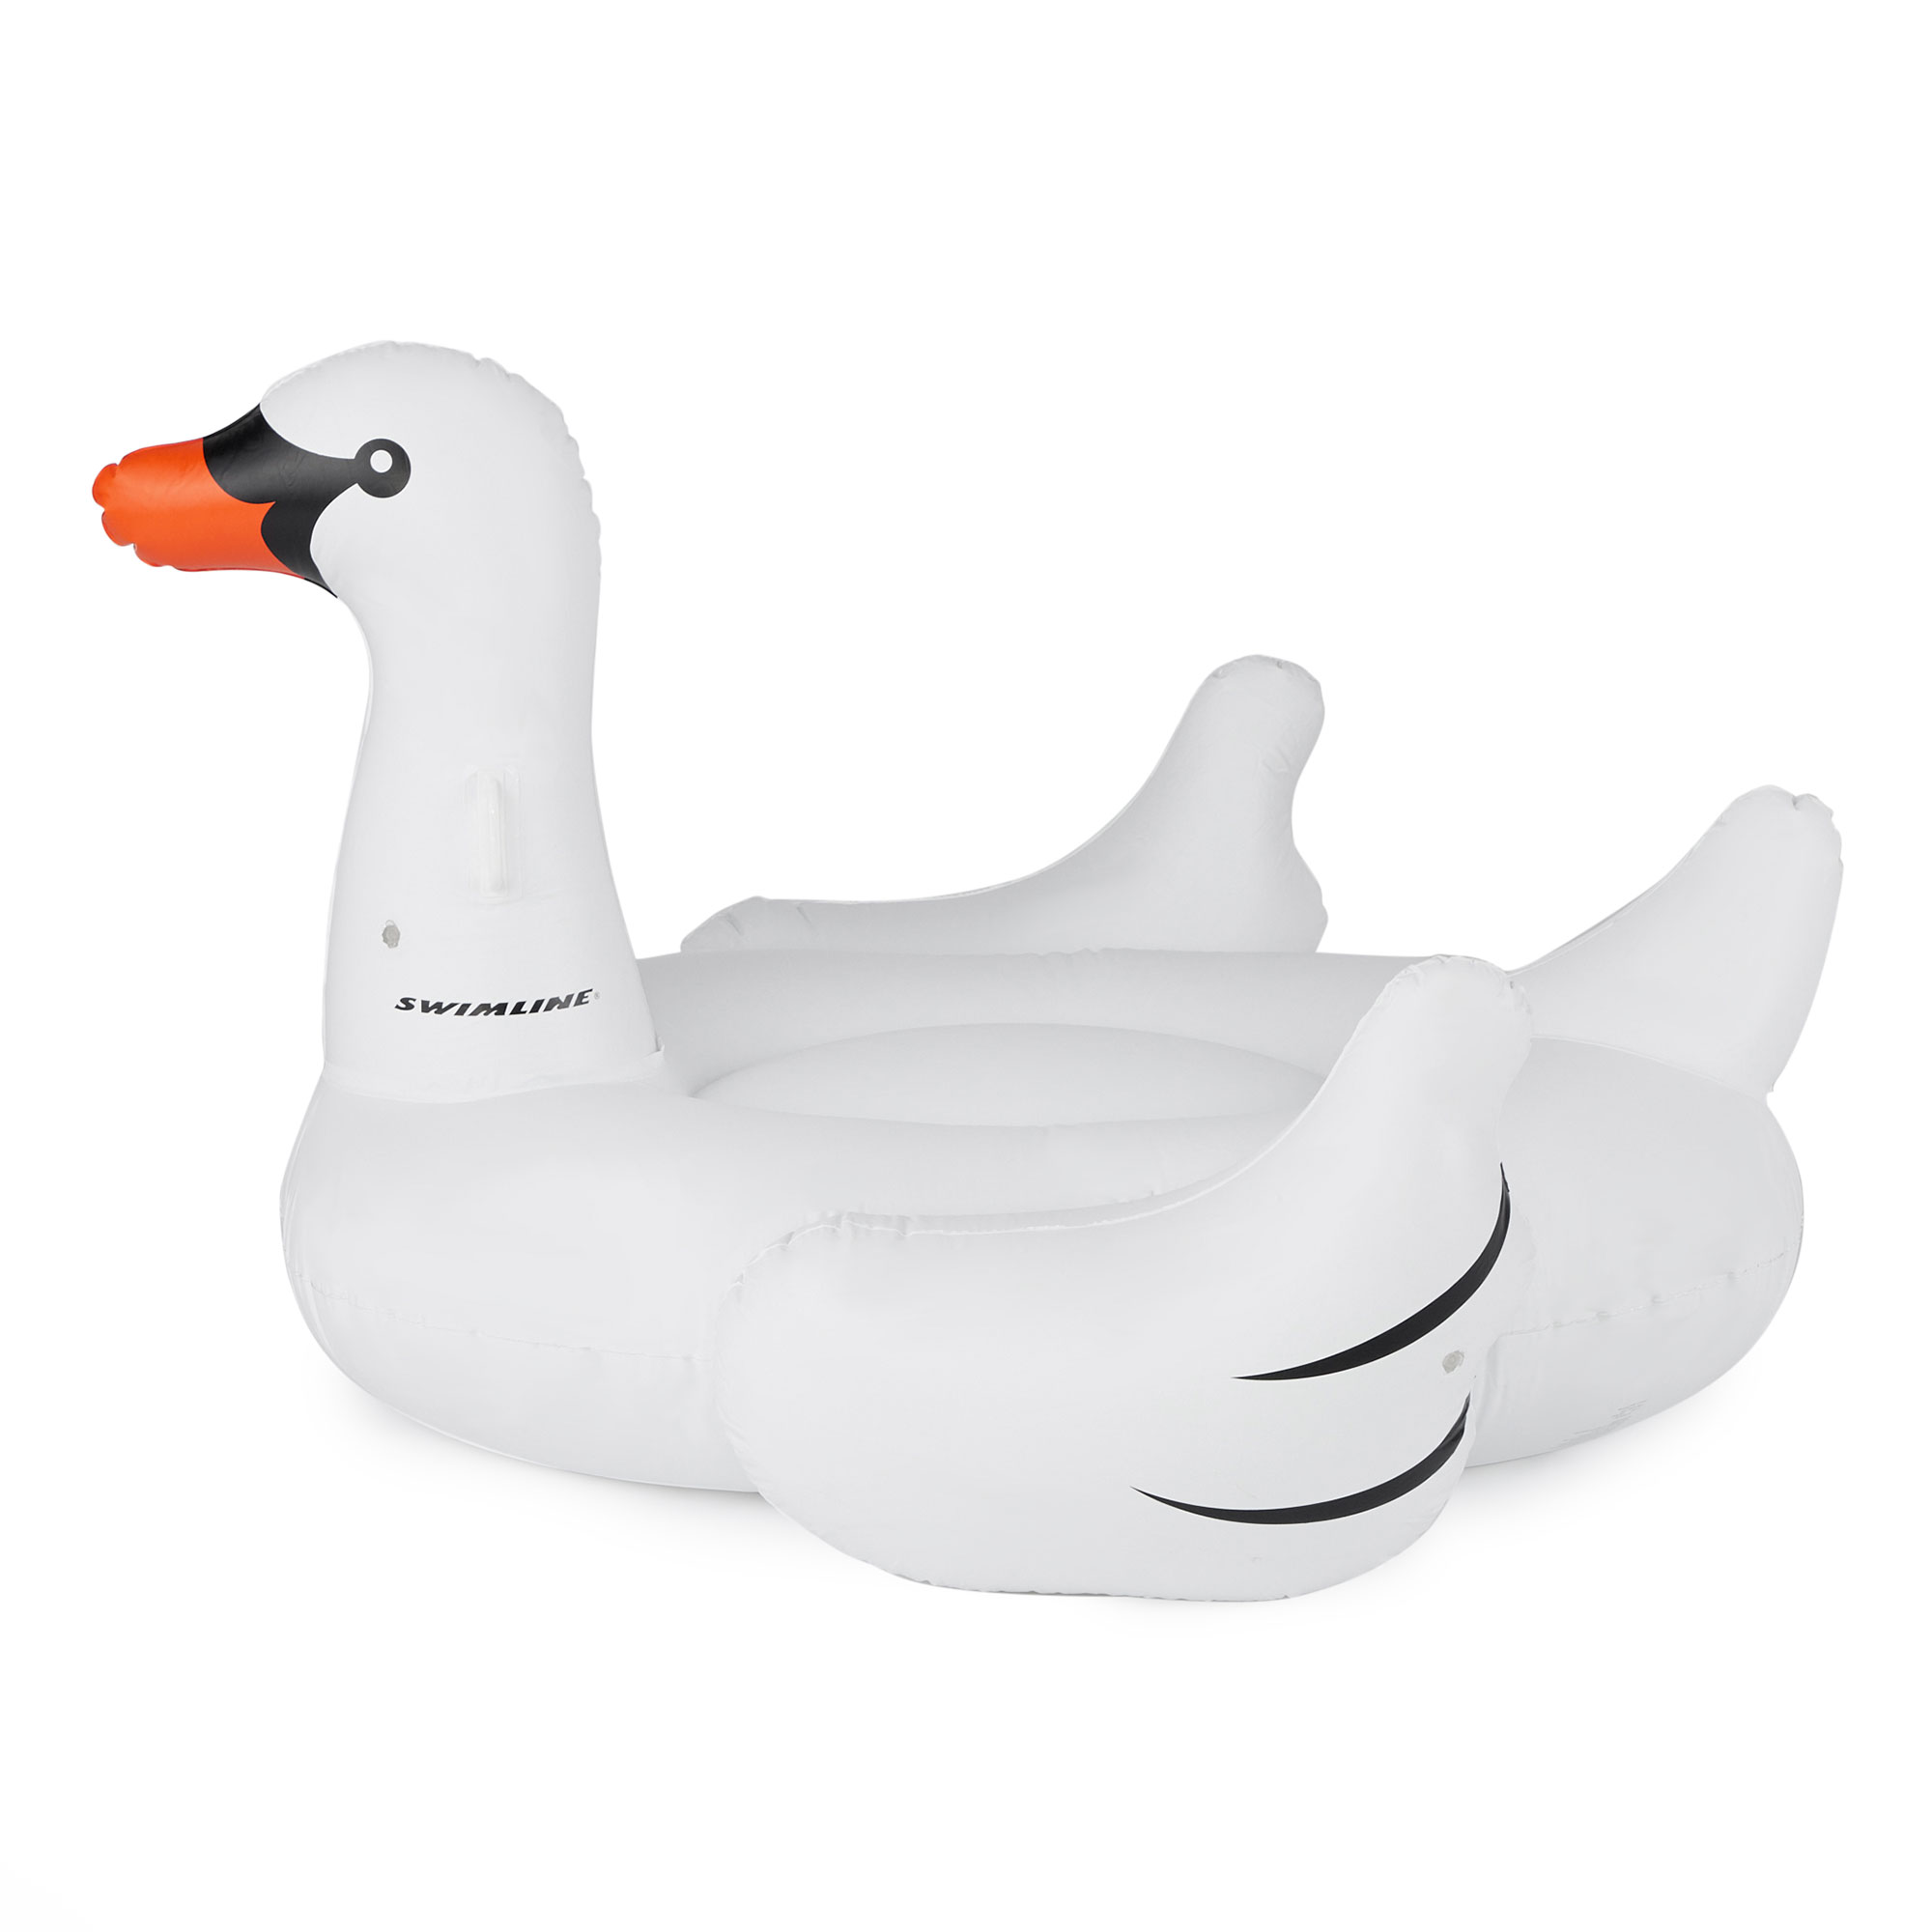 SWIMLINE ORIGINAL 90621 Giant Inflatable Swan Pool Float Floatie Ride-On Lounge W/ Stable Legs Wings Large Rideable Blow Up Summer Beach Swimming Party Lounge Big Raft Tube Decoration Toys Kids Adults - image 3 of 7